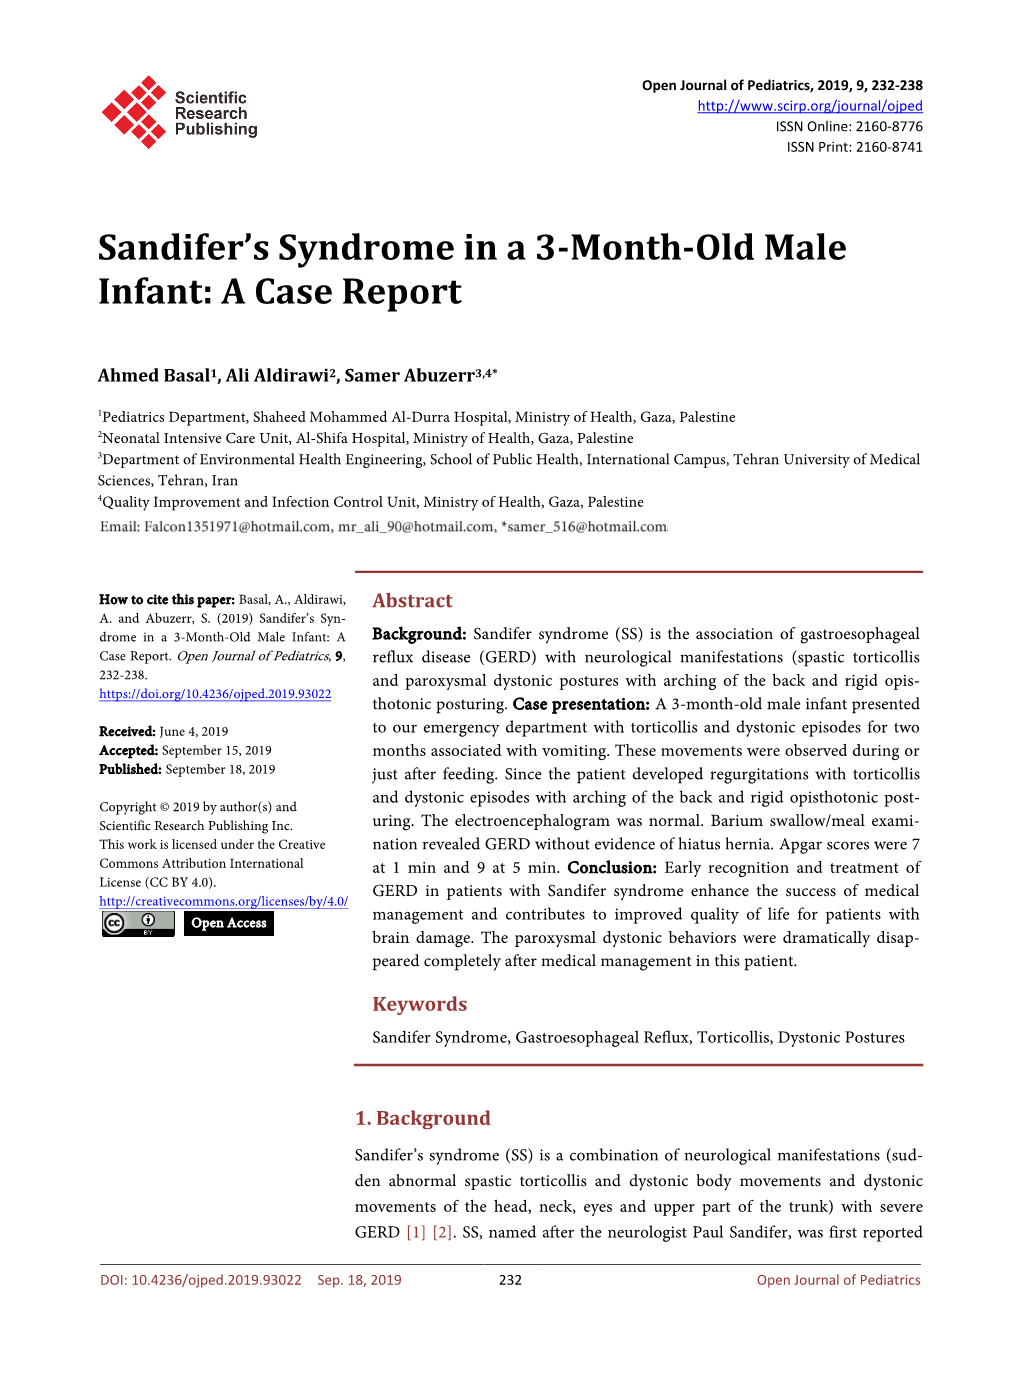 Sandifer's Syndrome in a 3-Month-Old Male Infant